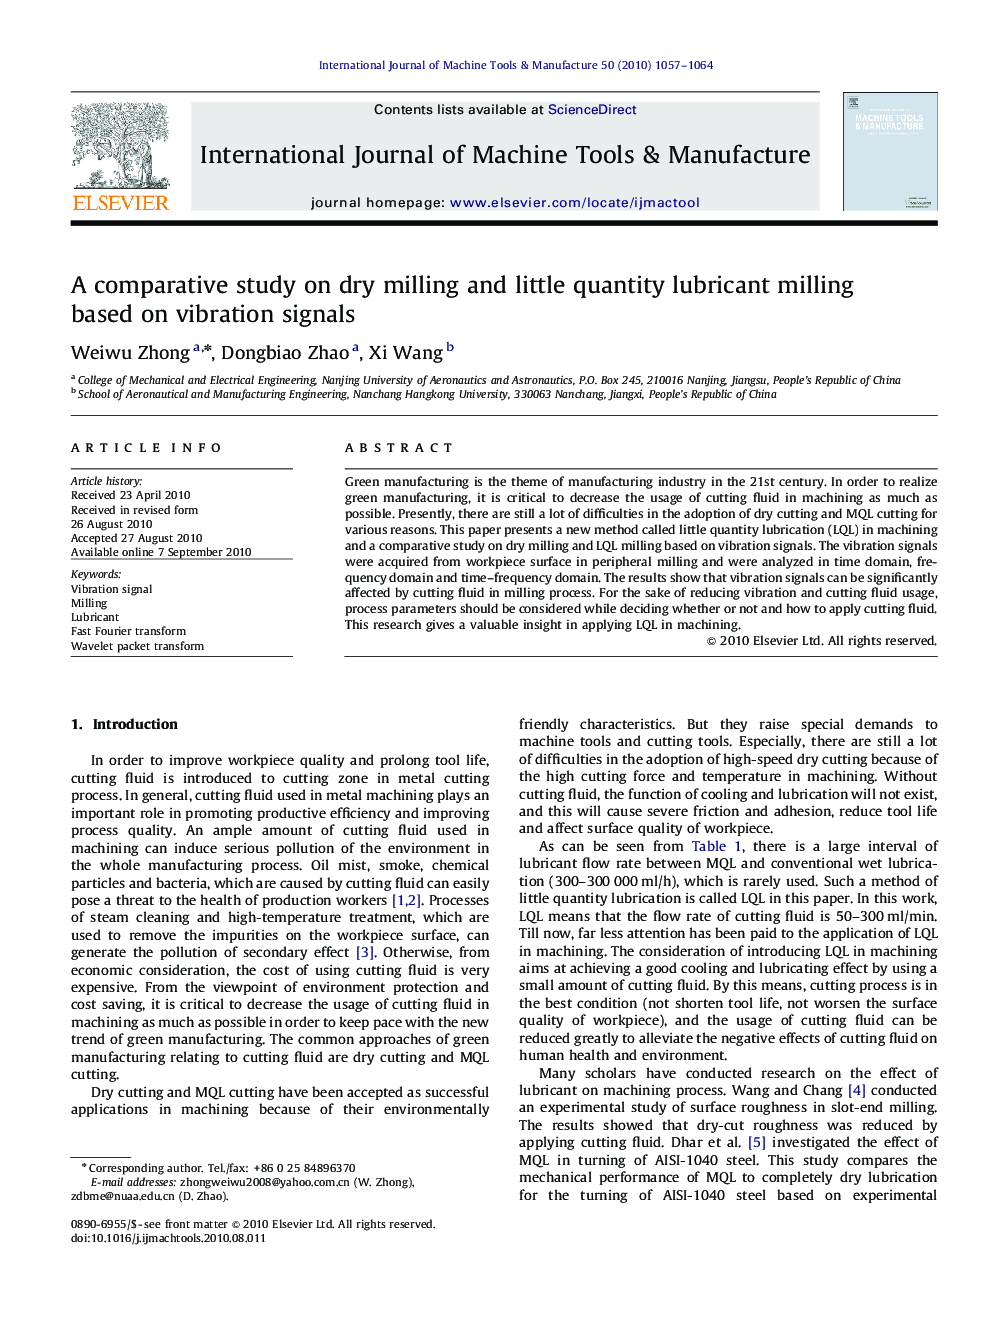 A comparative study on dry milling and little quantity lubricant milling based on vibration signals